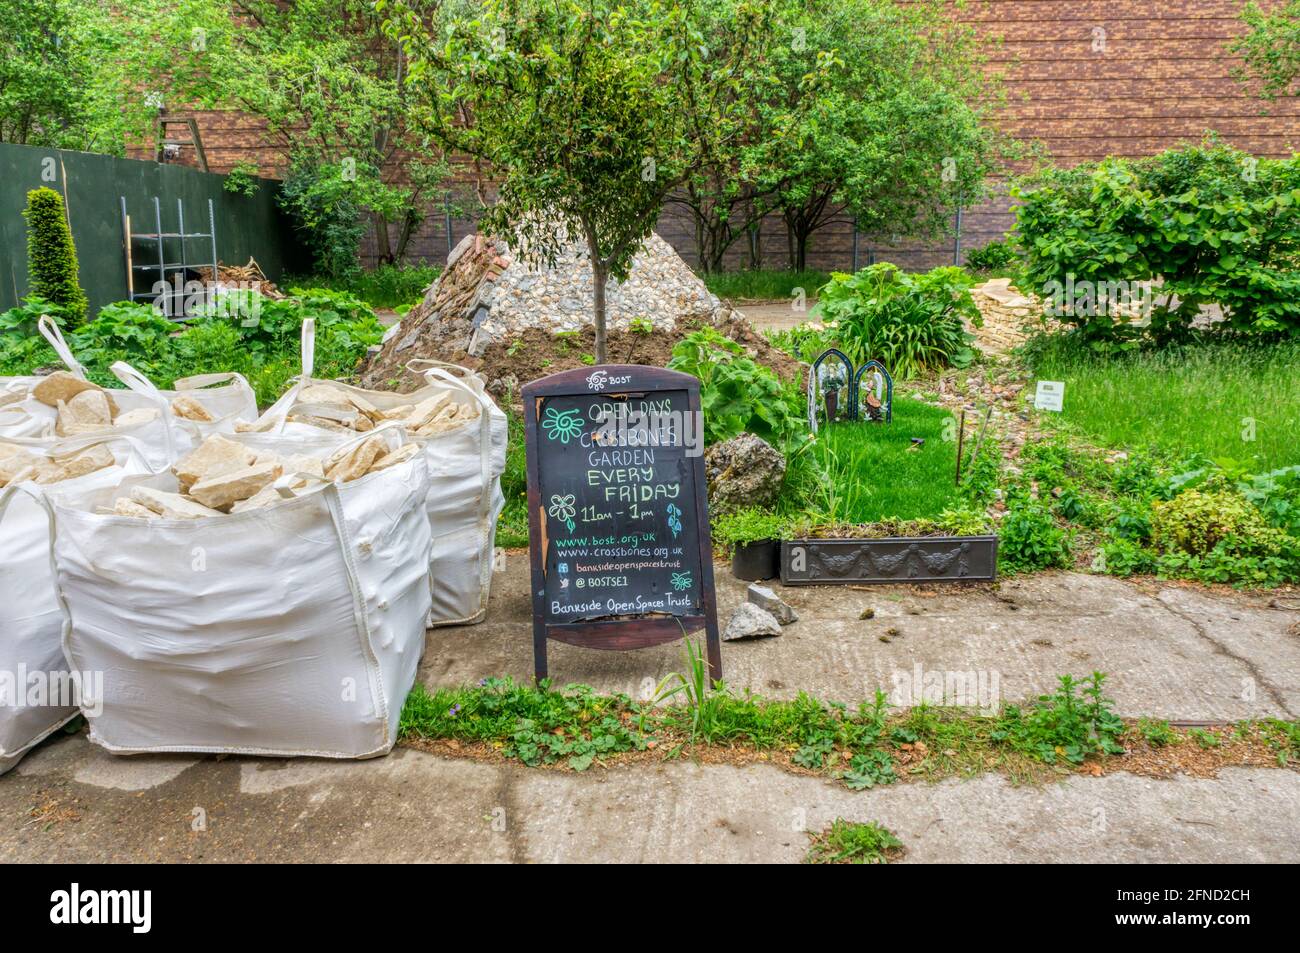 Open Day at Crossbones Garden on site of old burial ground in Southwark, South London. Stock Photo